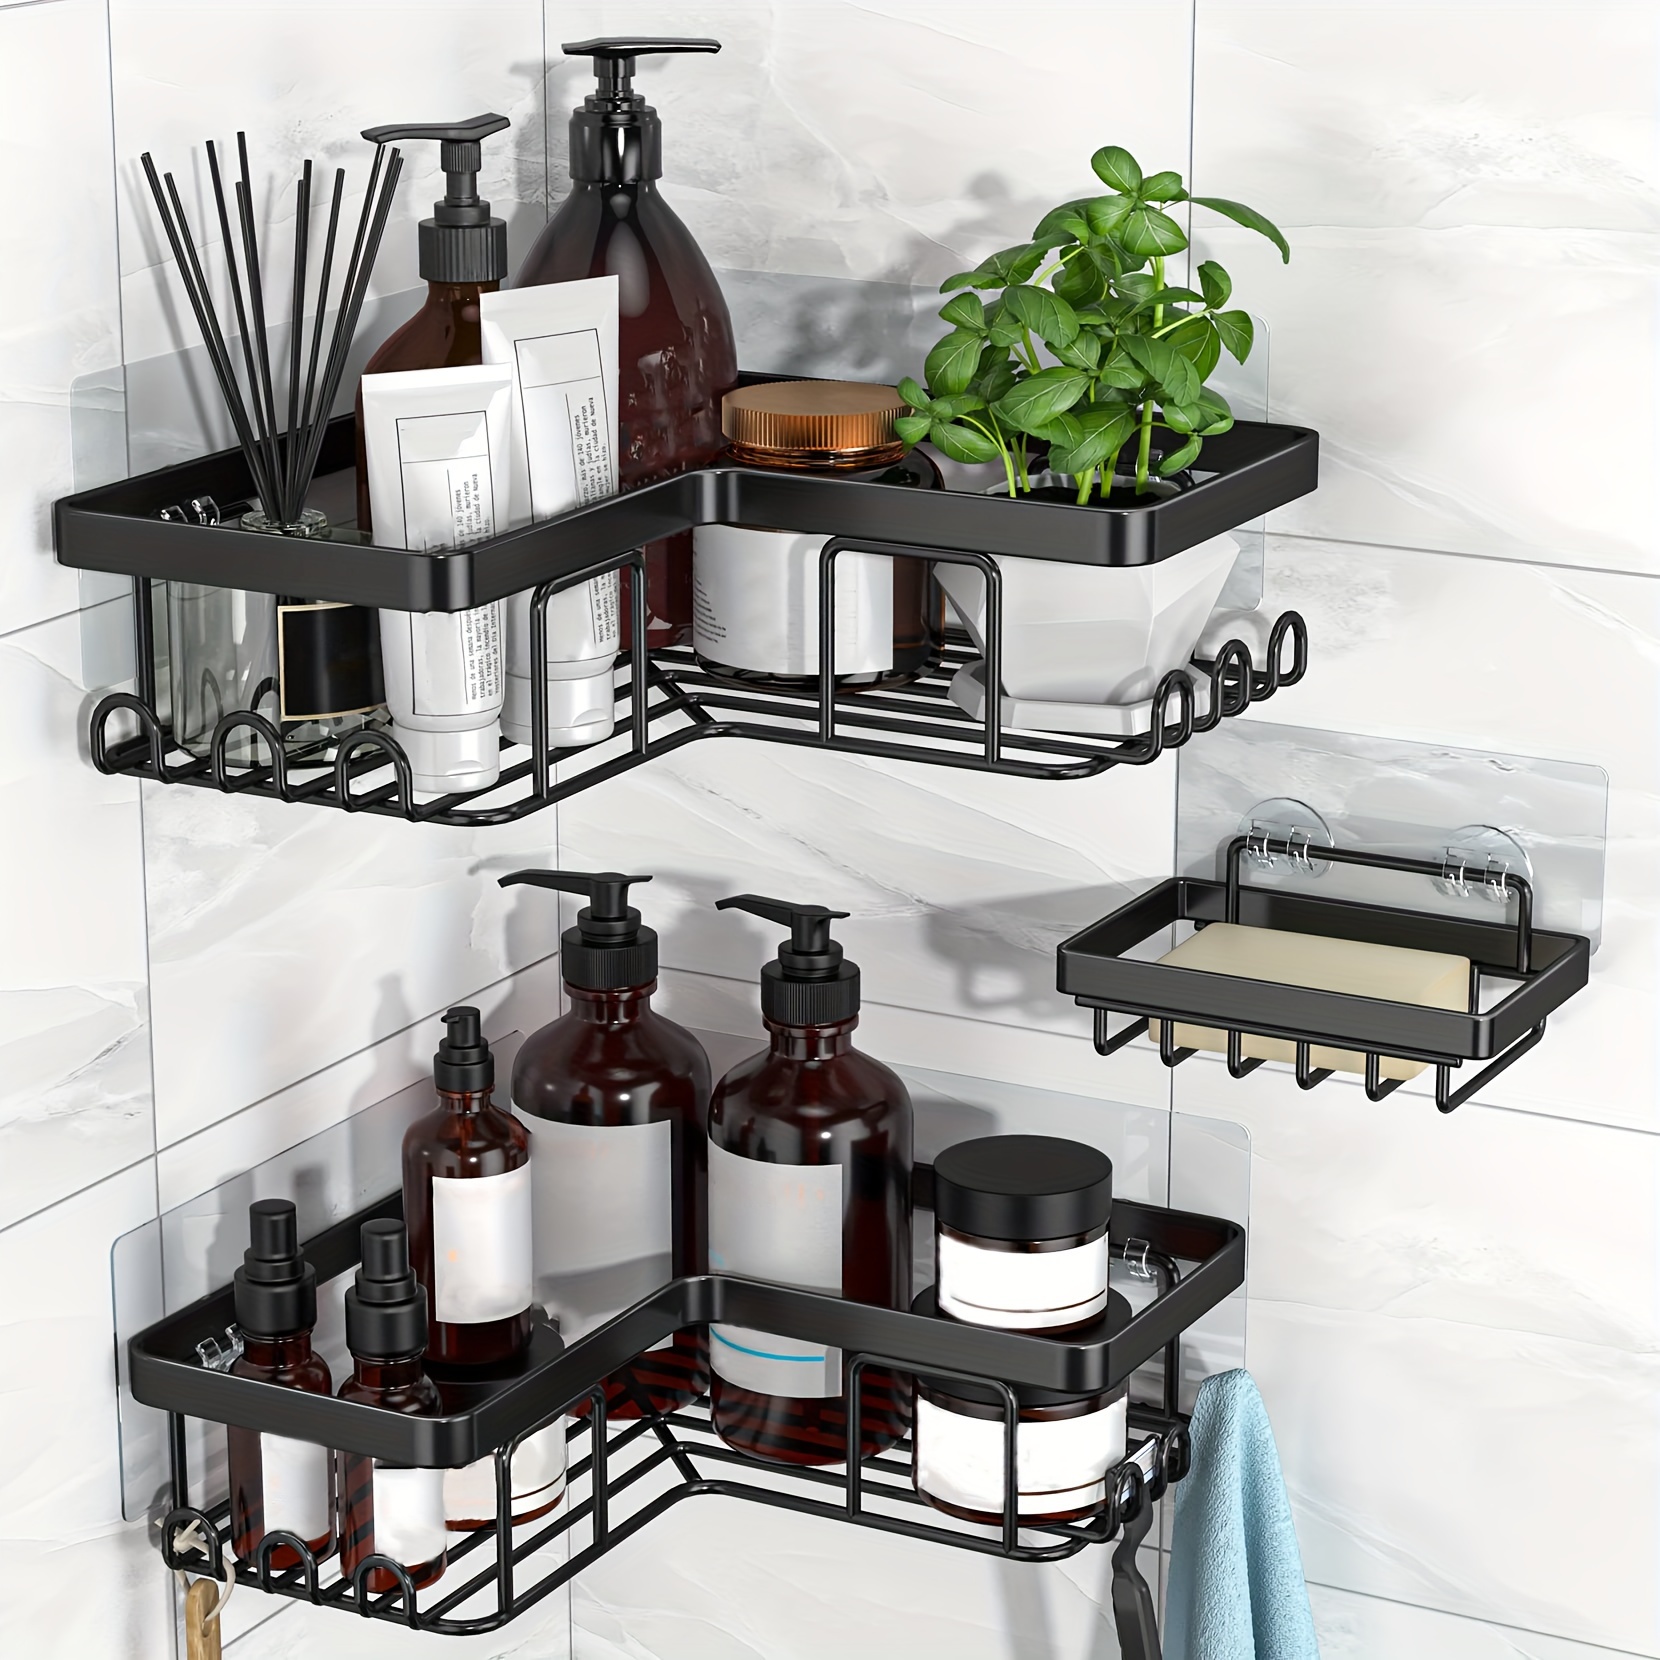 HapiRm Shower Caddy Shelf with 11 Hooks, Shower Rack for Hanging Razor, Soap and Shower Gel, No Drilling Bathroom Shelf with 3-4 Traceless Adhesive